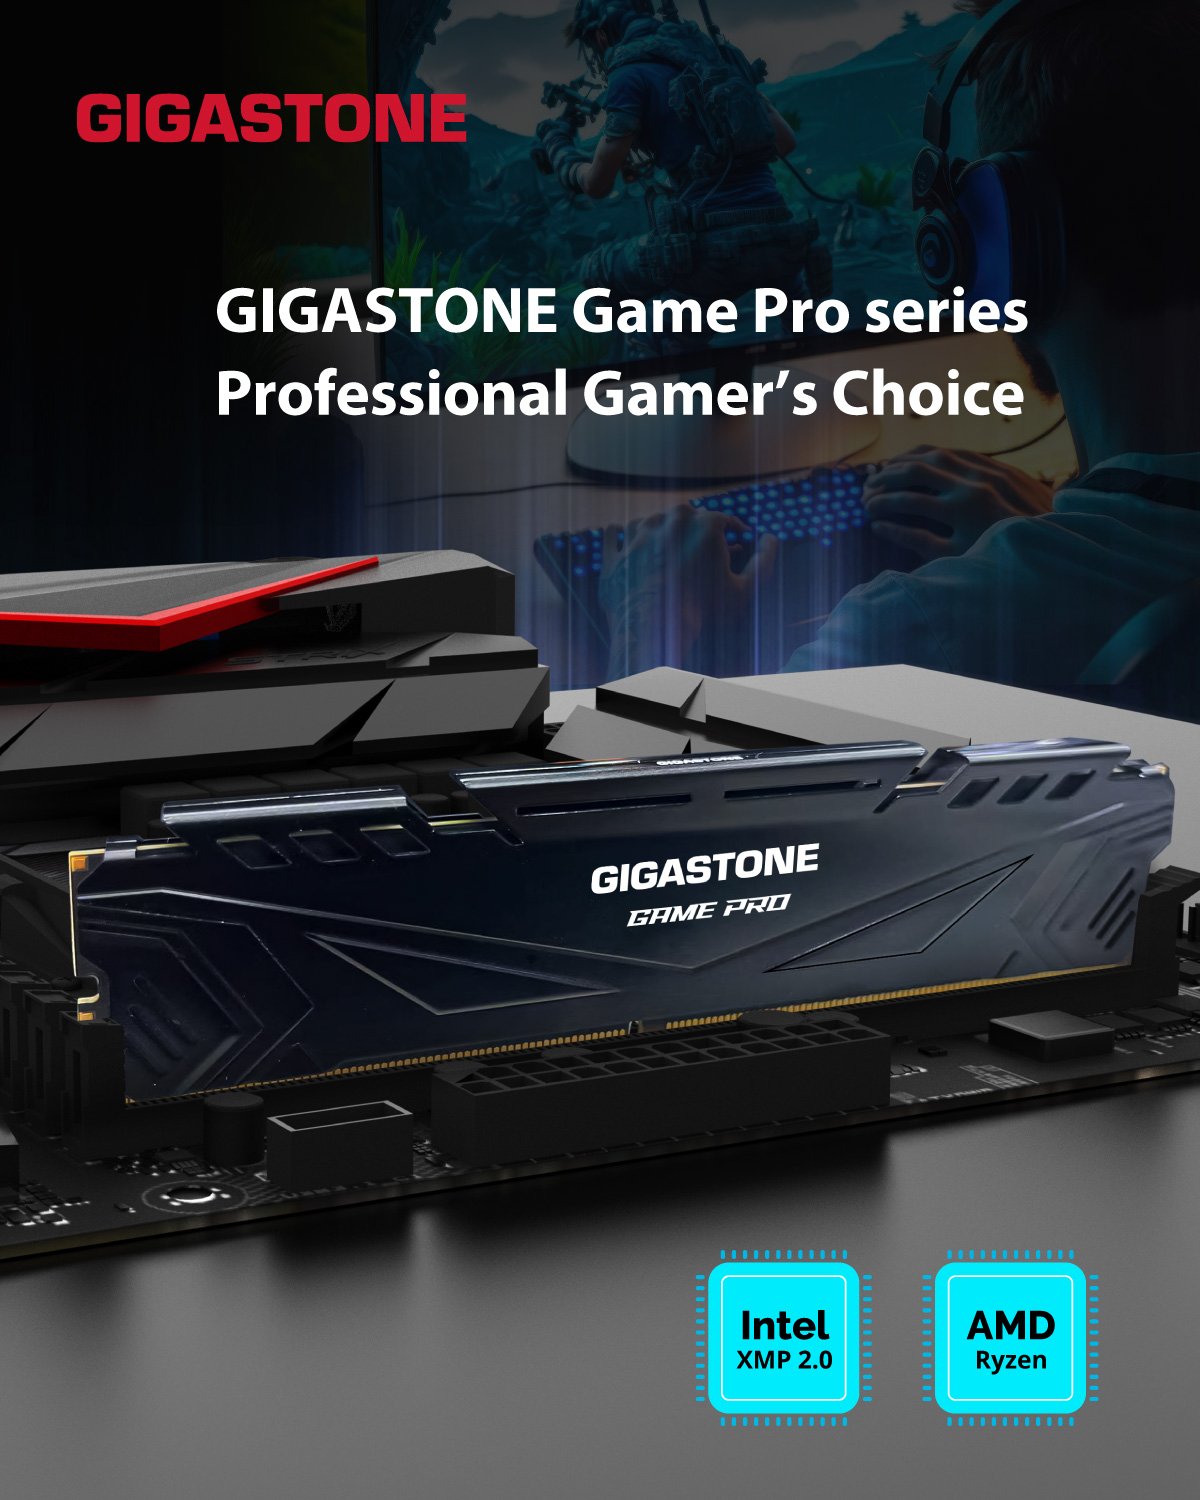 GAME PRO SERIES PROFESSIONAL GAMER'S CHOICE